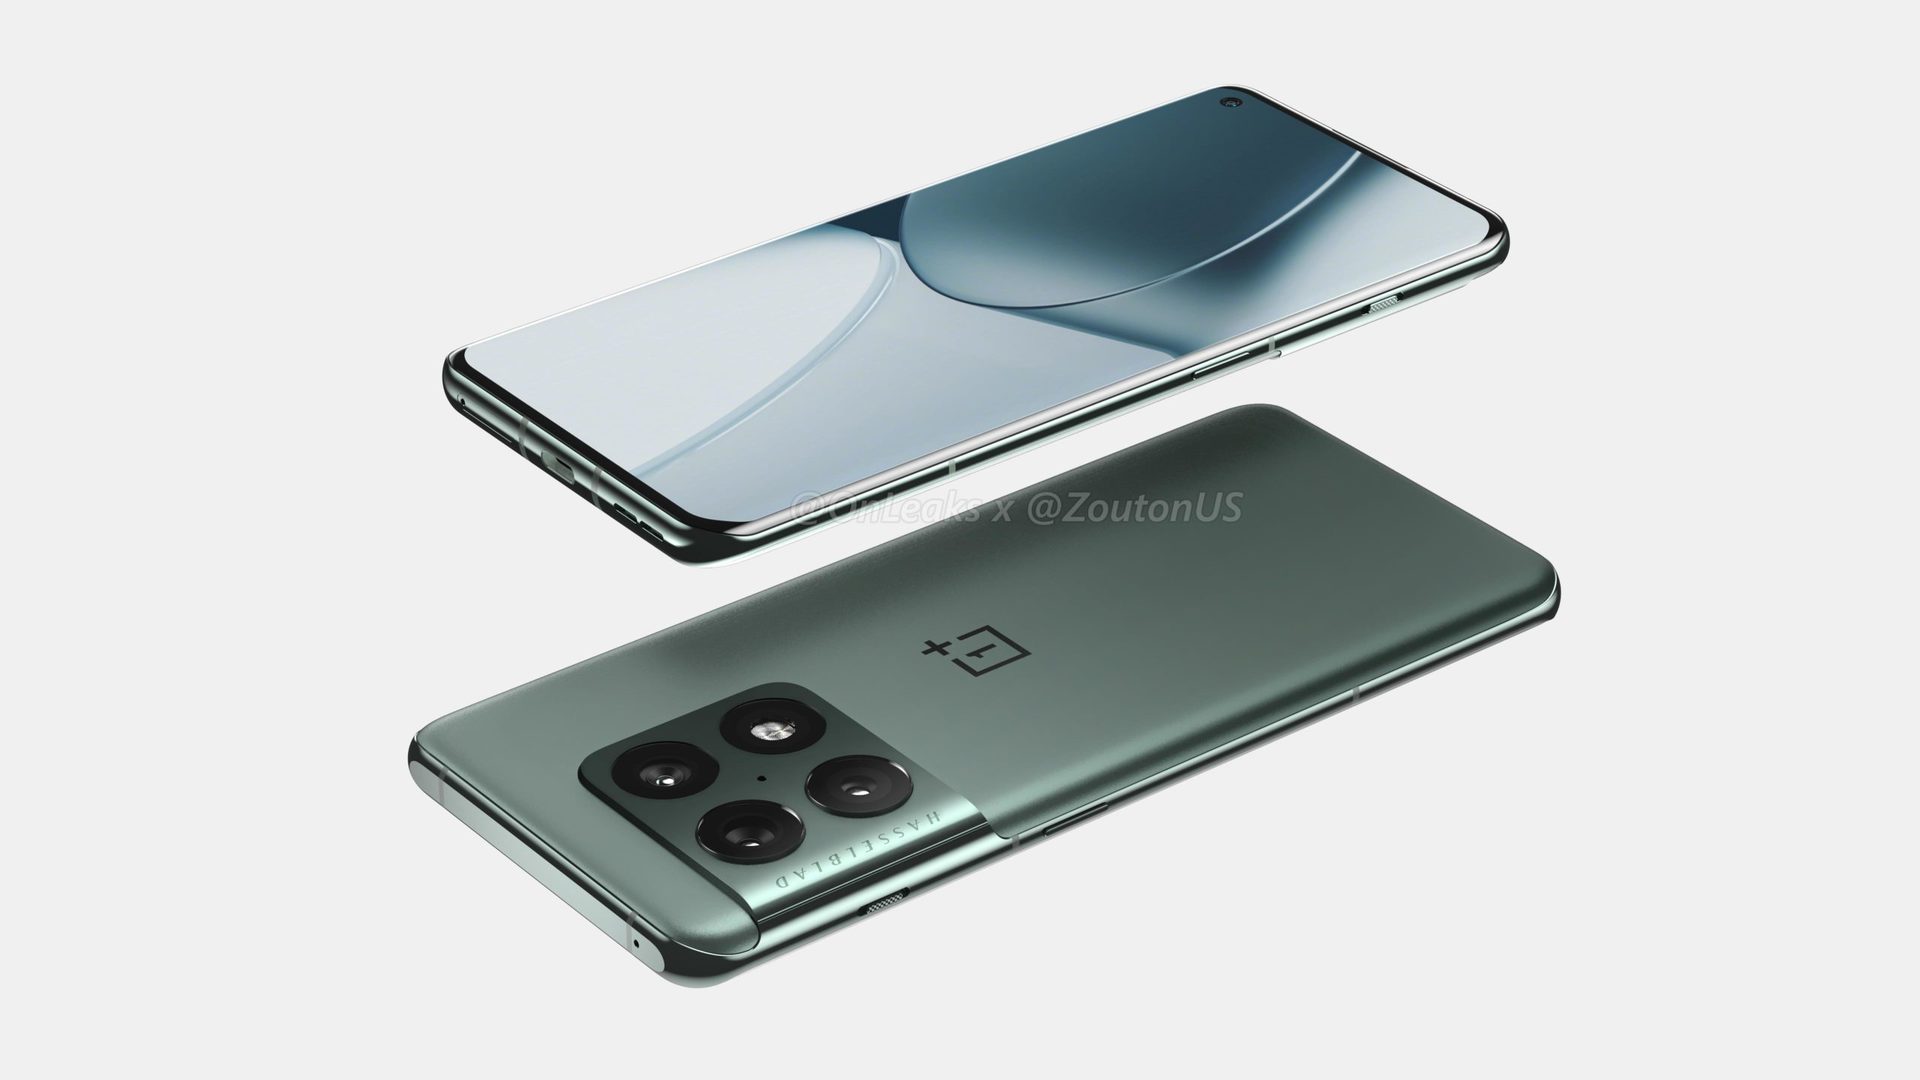 Earlier than expected: OnePlus says OnePlus 10 Pro is coming in January